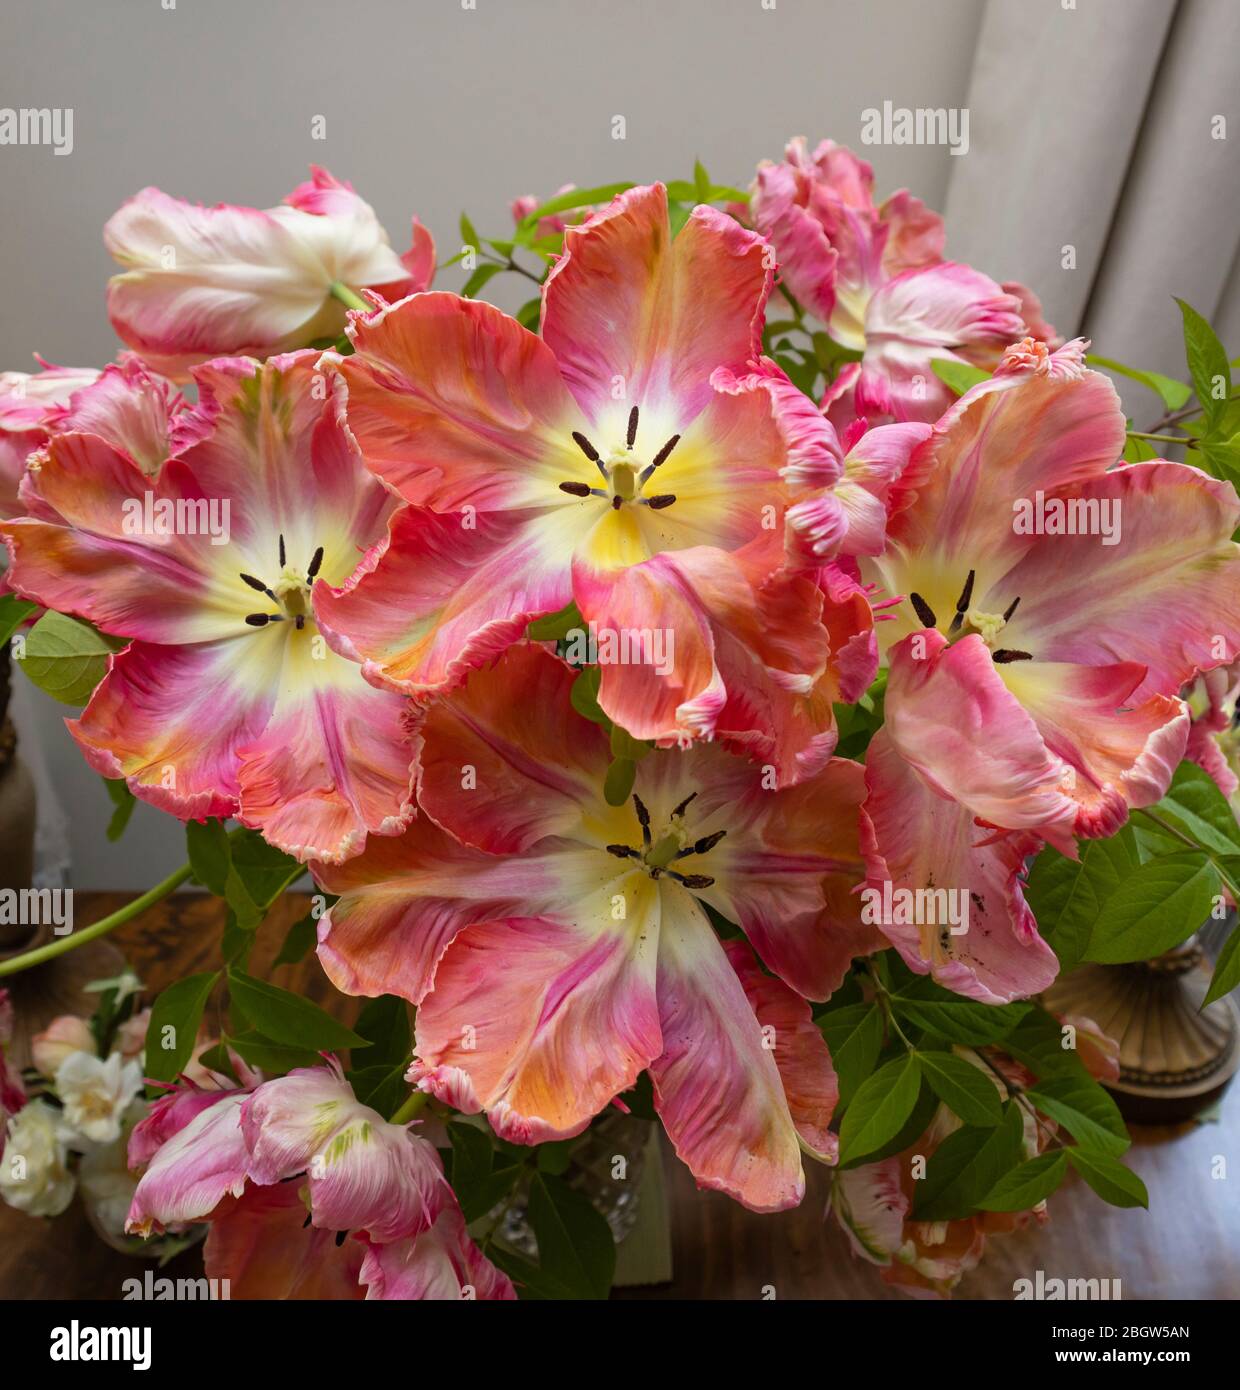 Arrangement of a large multi-coloured Apricot Parrot tulips with irregular shaped frilly petals in bloom in late spring, Surrey, SE England Stock Photo